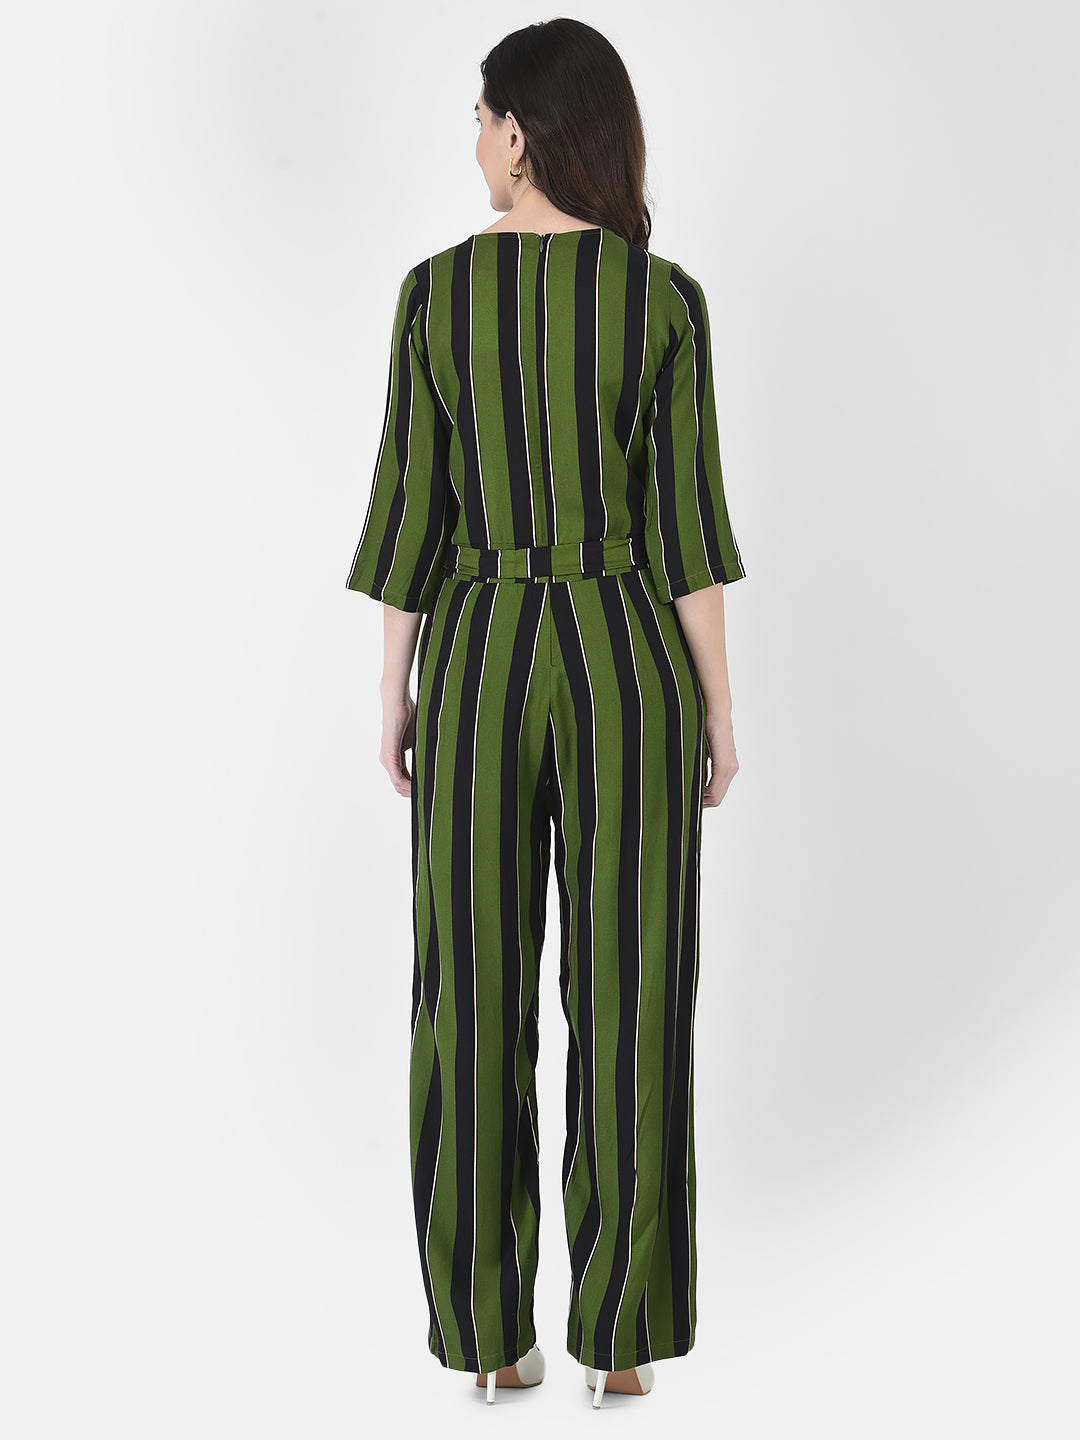 Green Striped Jumpsuit - Women Dungarees